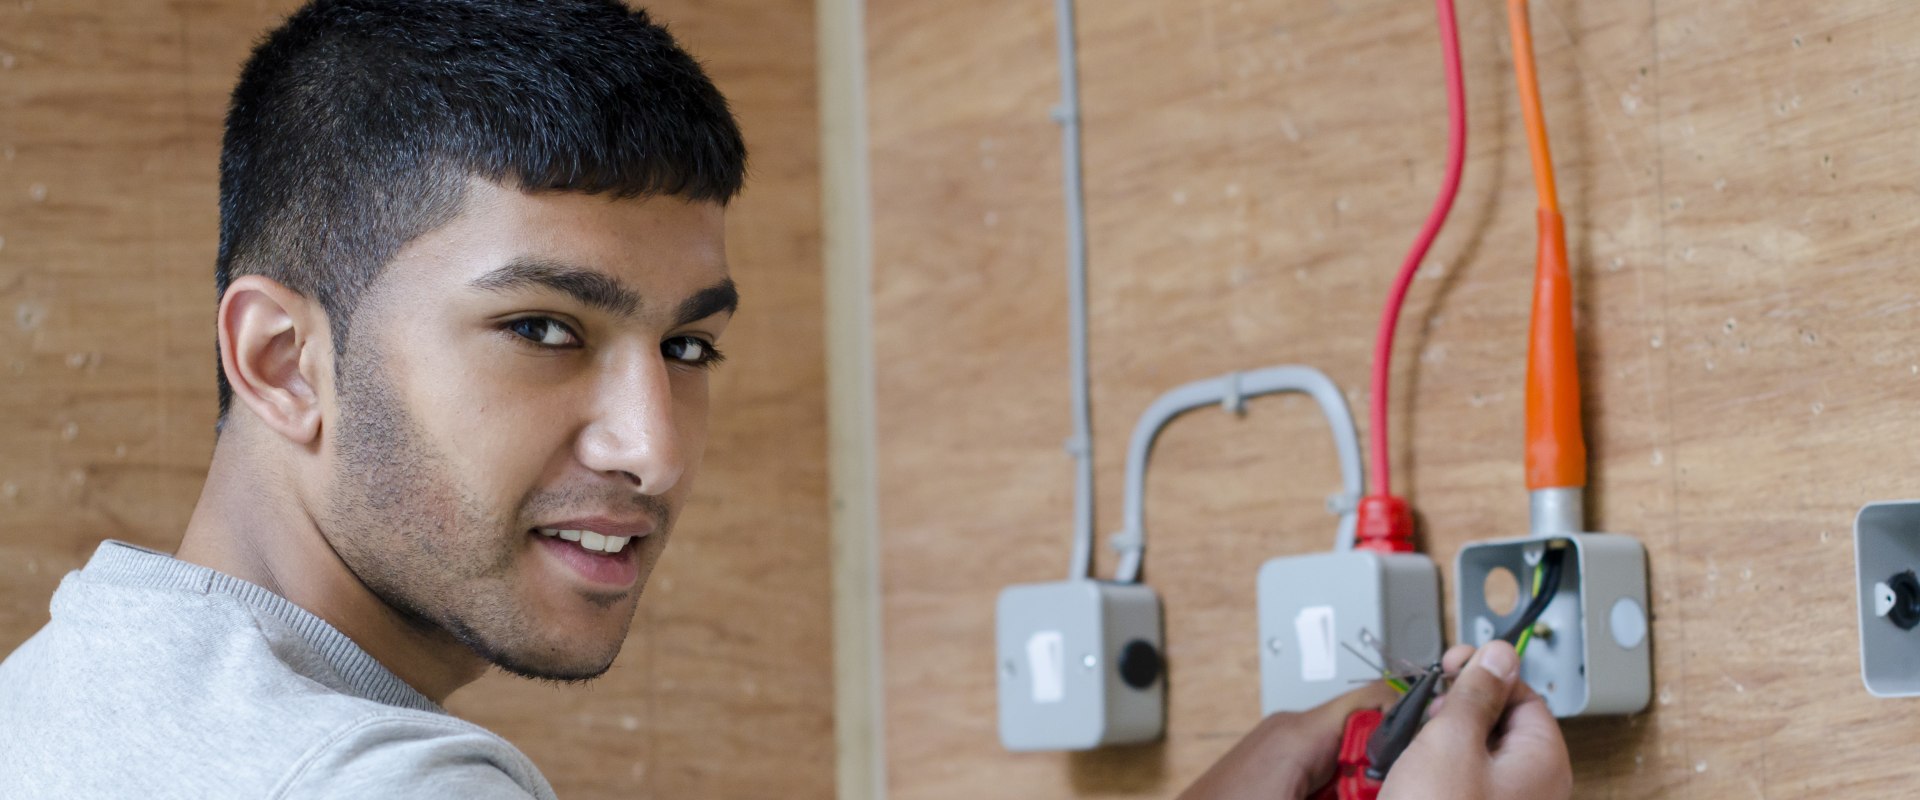 What Level Does a Fully Qualified Electrician Reach?